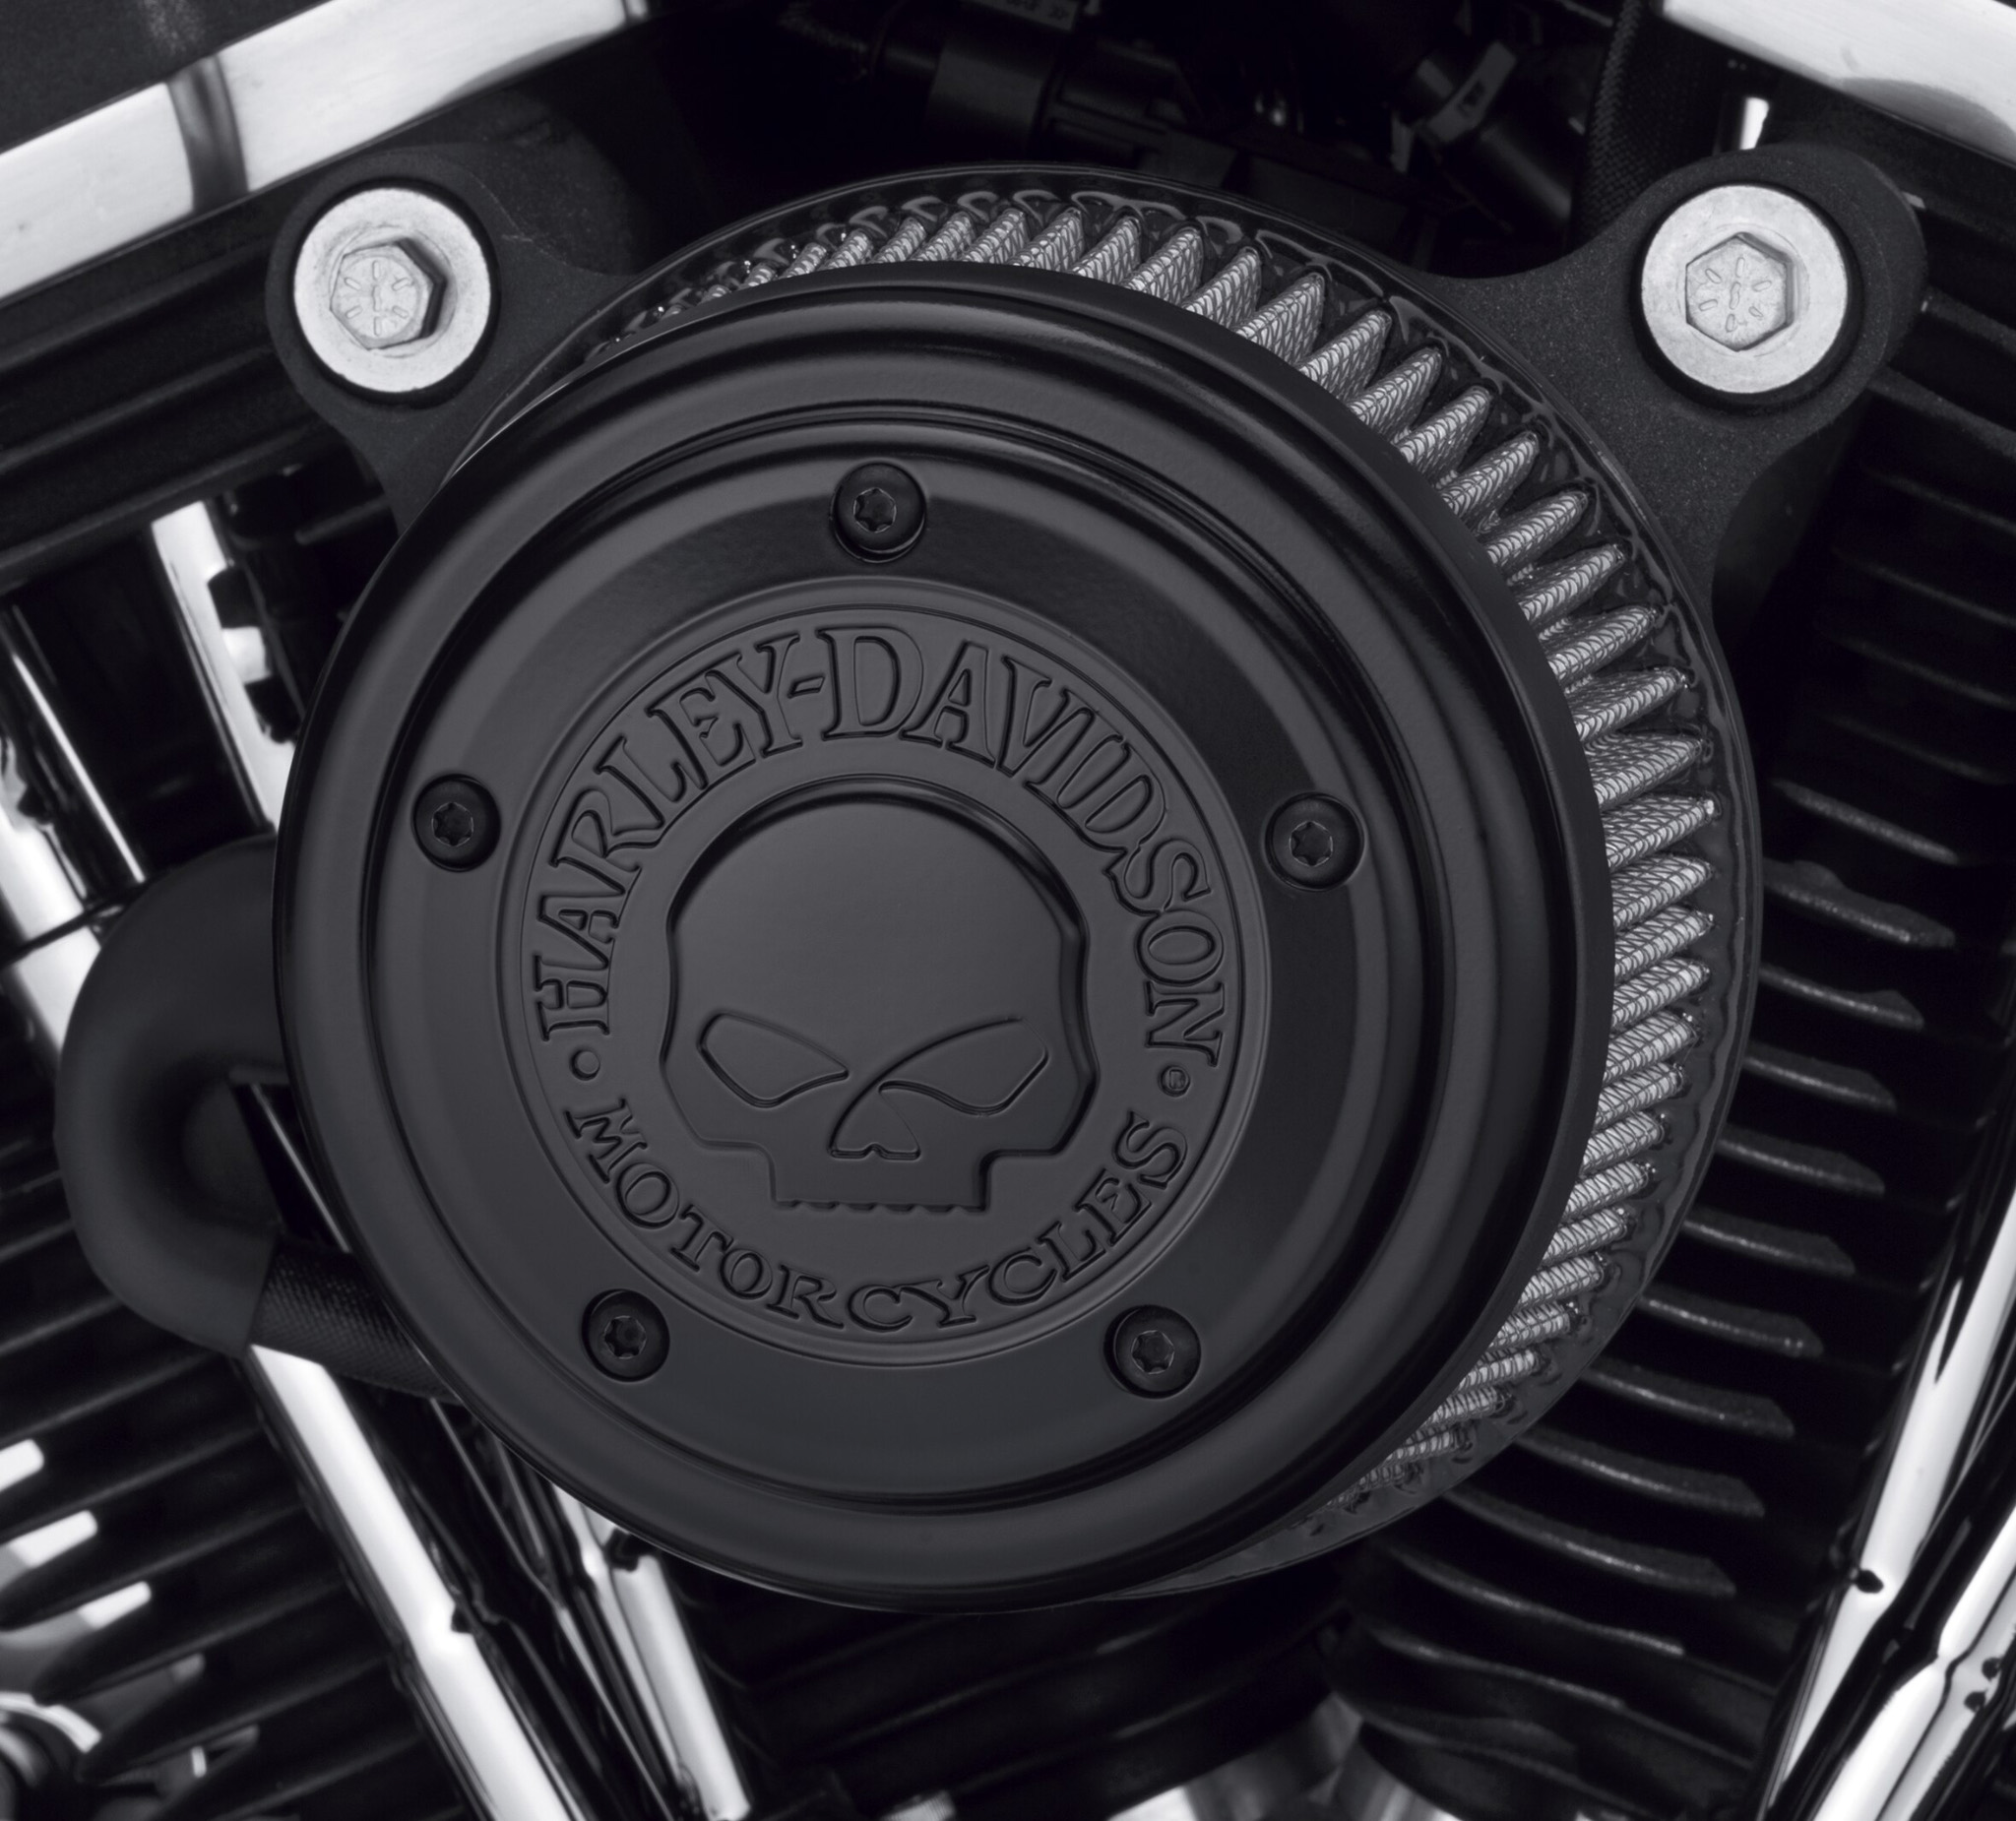 air cleaner covers for harley davidson